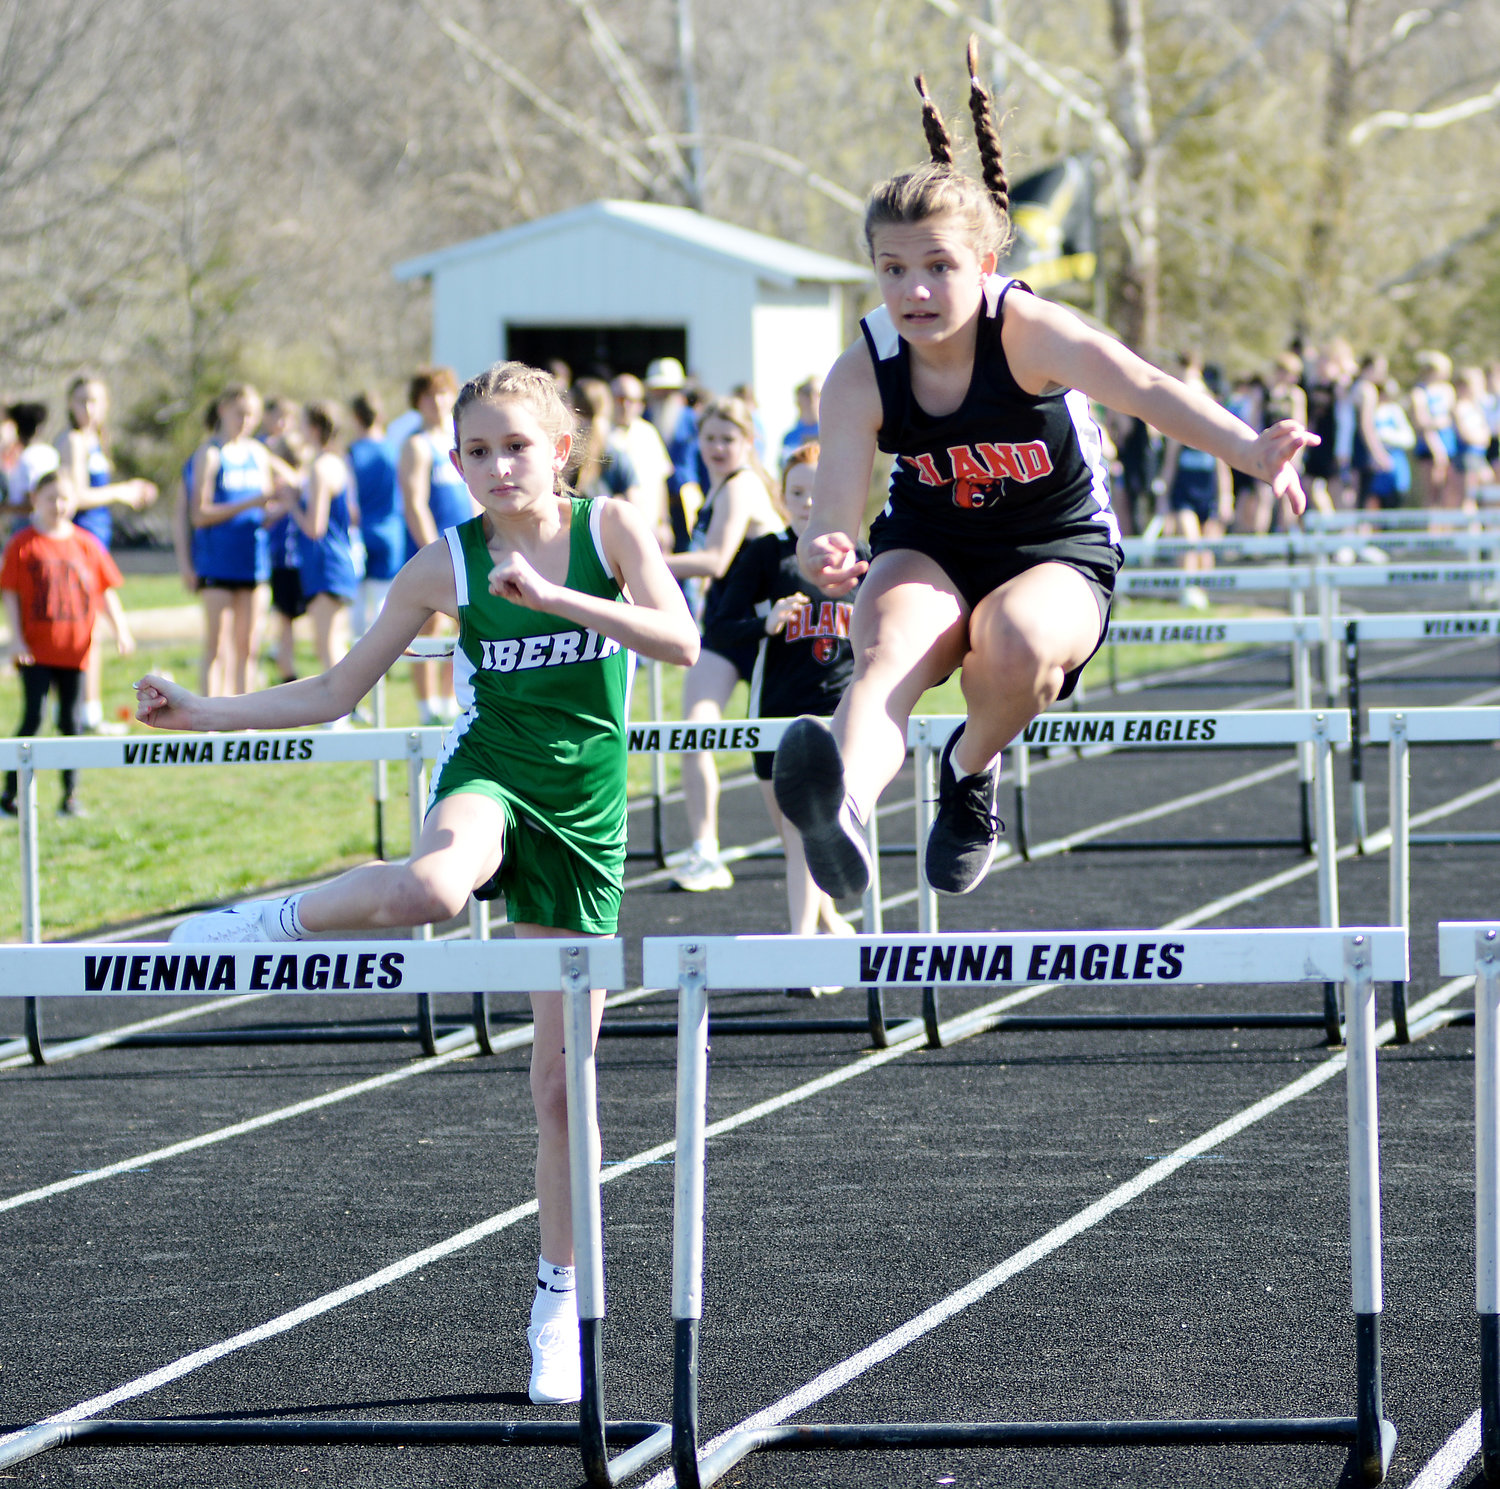 Natalie Lansford (far right) clears a hurdle for Bland’s Lady Bears during the 75-meter hurdles with Iberia’s Gabby Imperato not too far behind.